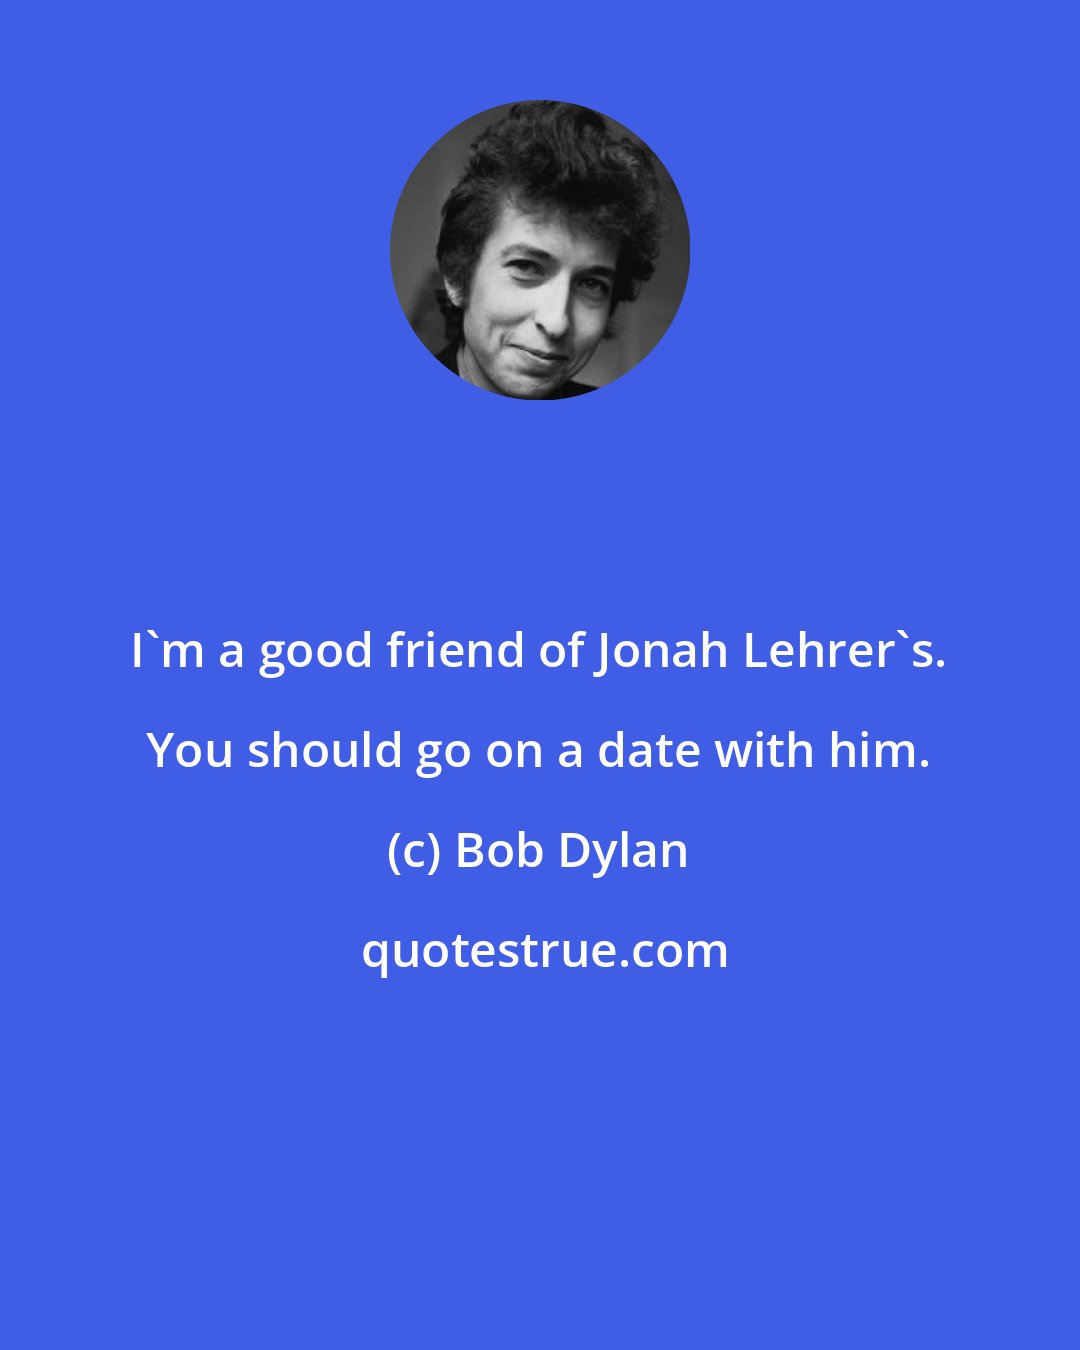 Bob Dylan: I'm a good friend of Jonah Lehrer's. You should go on a date with him.